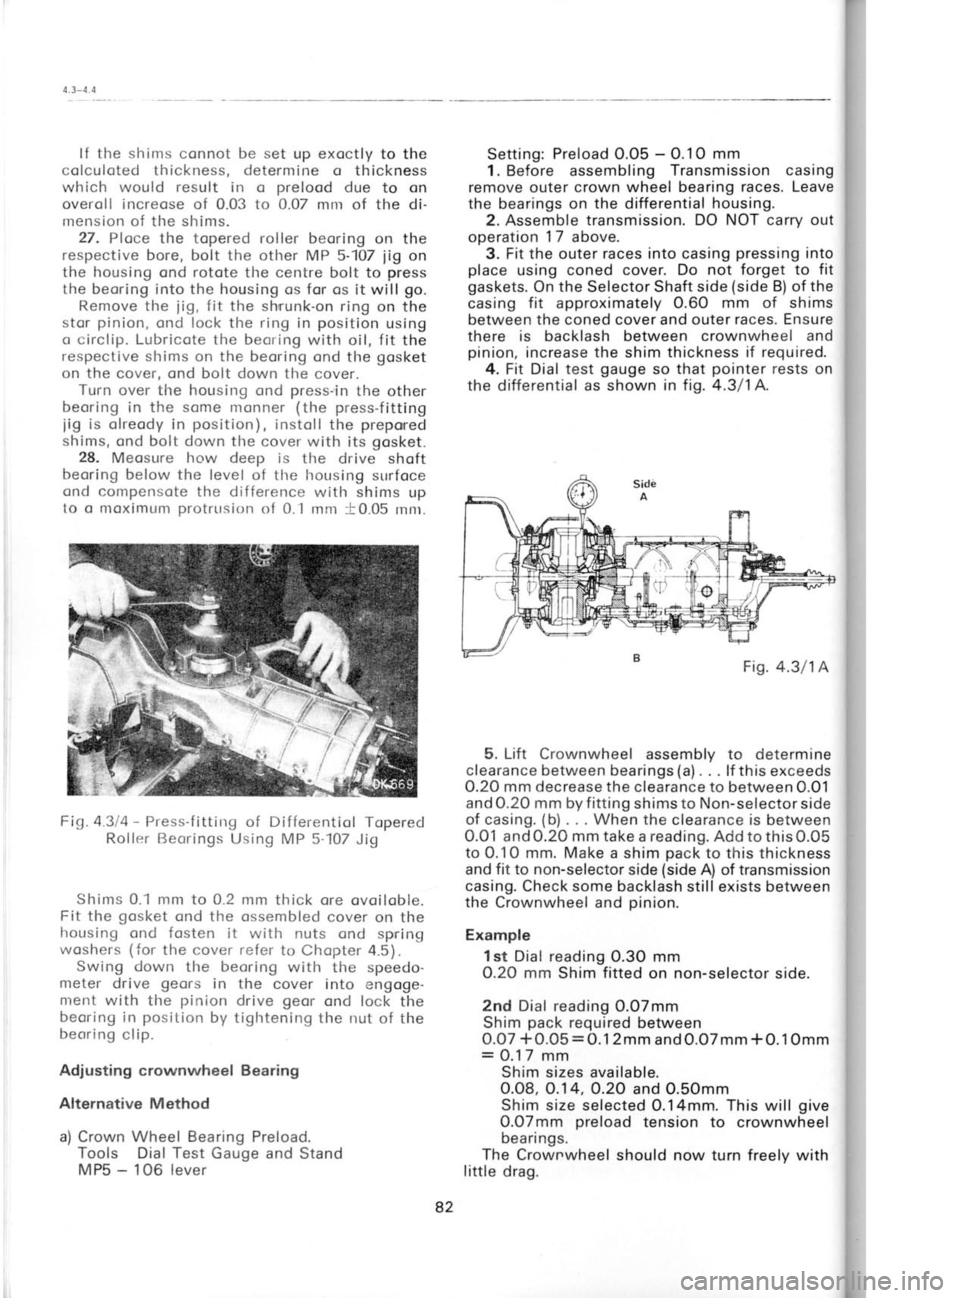 SKODA 120 LS 1980  Workshop Manual 4.3-4.4
F
I
t
F
i
!
I
r
{.3-4.4
6.  Remo
b) Crownwl Tools:
Settin
not  le
1. Install
one  of  the
Glave Cylir
that  the p
pendicular
2. Lock
between  tl"
cover. 3. Using
back  and
clearance  I
teeth. 